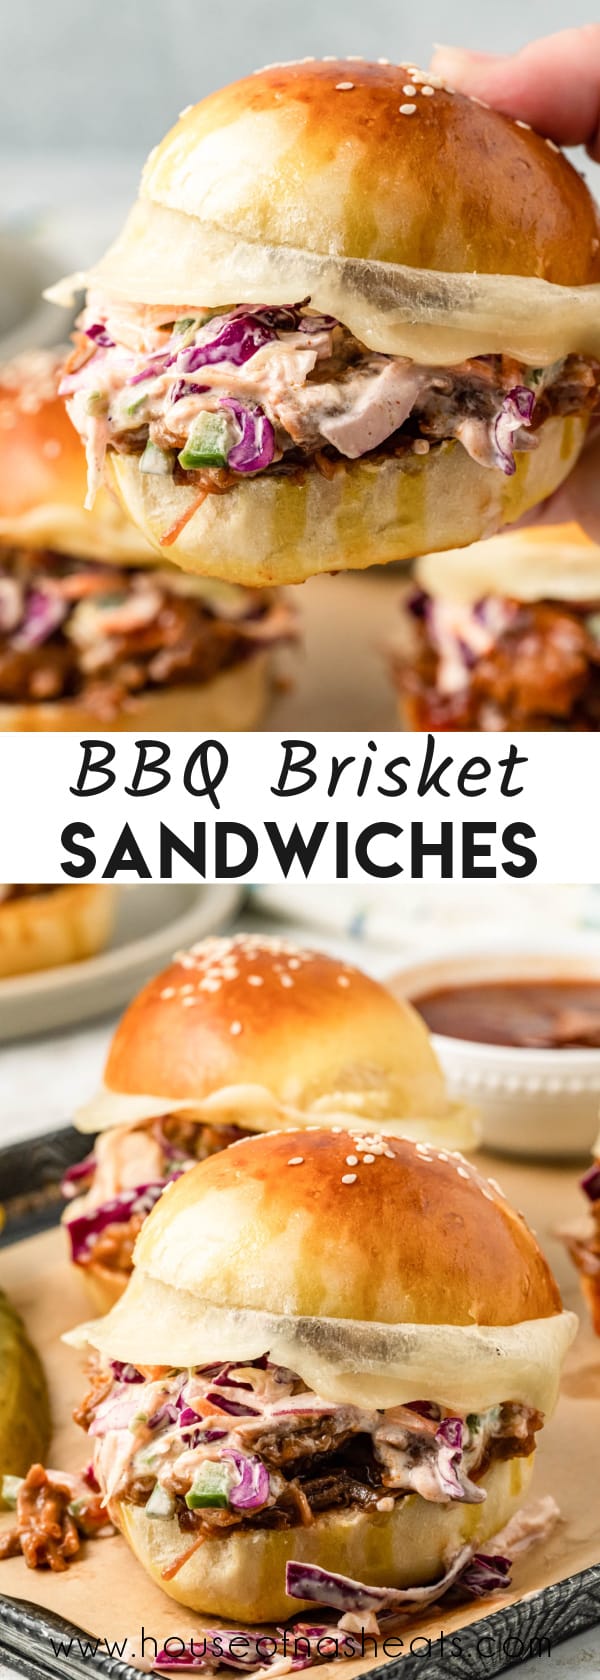 A collage of images of beef brisket sandwiches with text overlay.